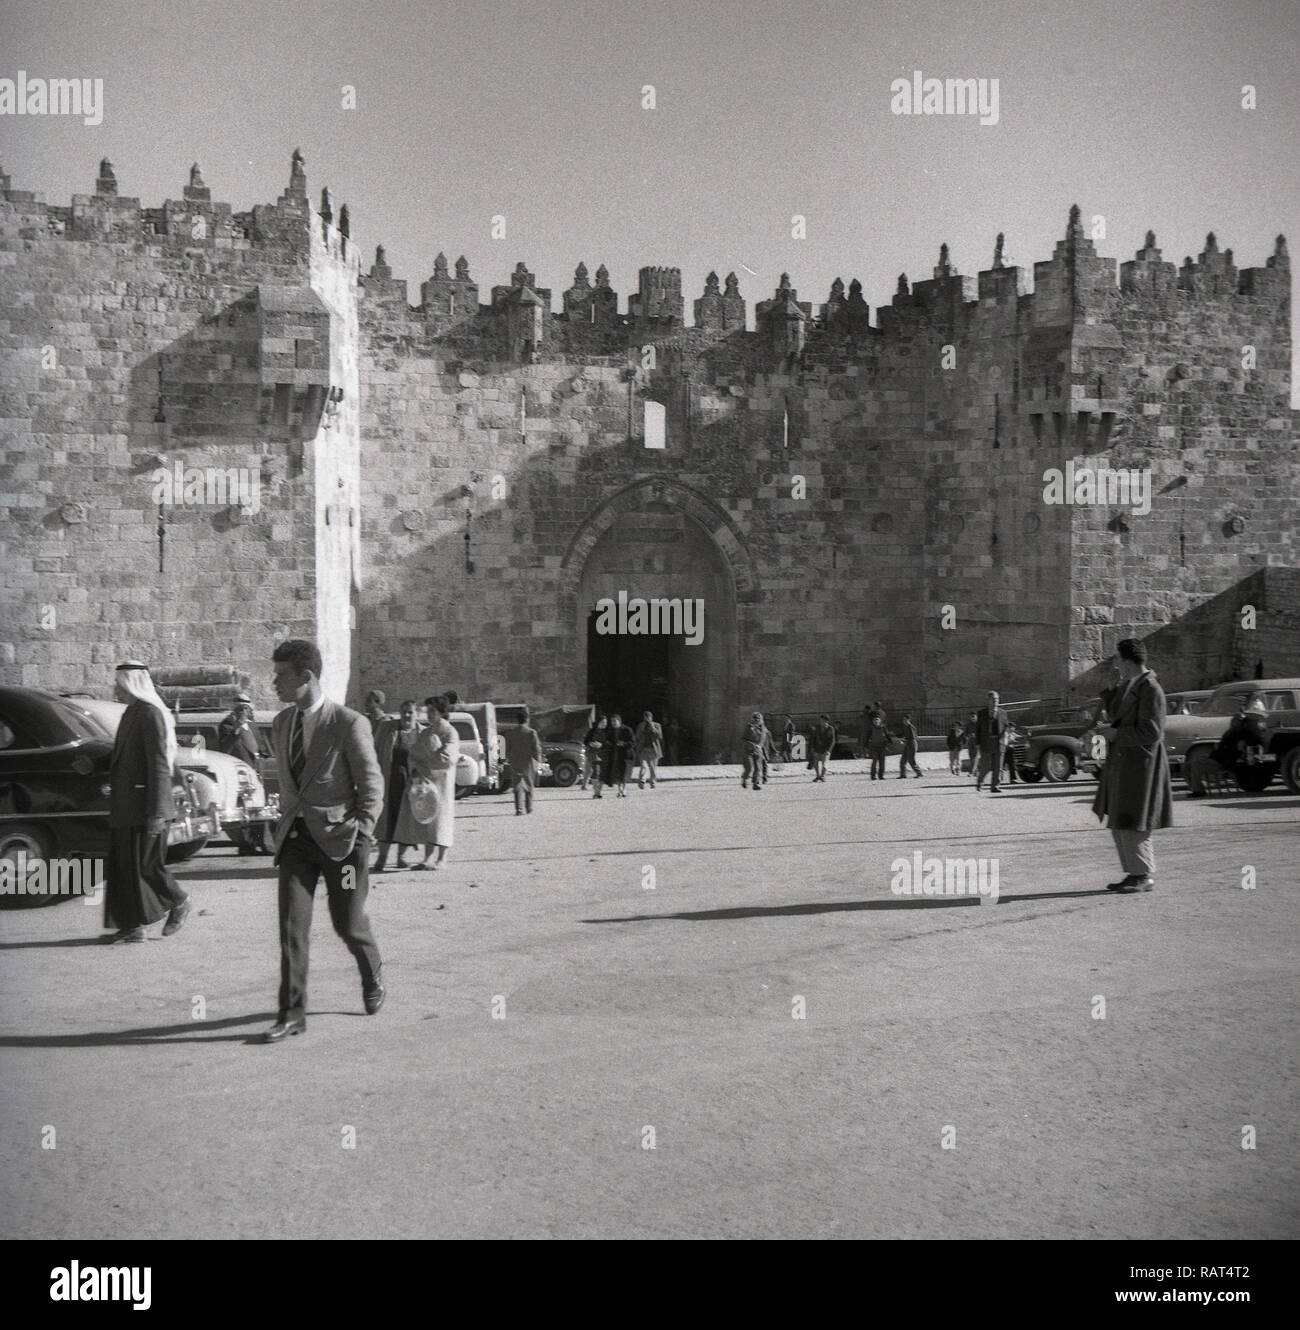 1940s, historical, parked cars and people outside Damascus Gate one of the main entrances to the old holy city of Jerusalem. The gate was built in 1537 under the rule of the Sultan of the Ottoman Empire, repacing an earlier gate from Roman times. Stock Photo